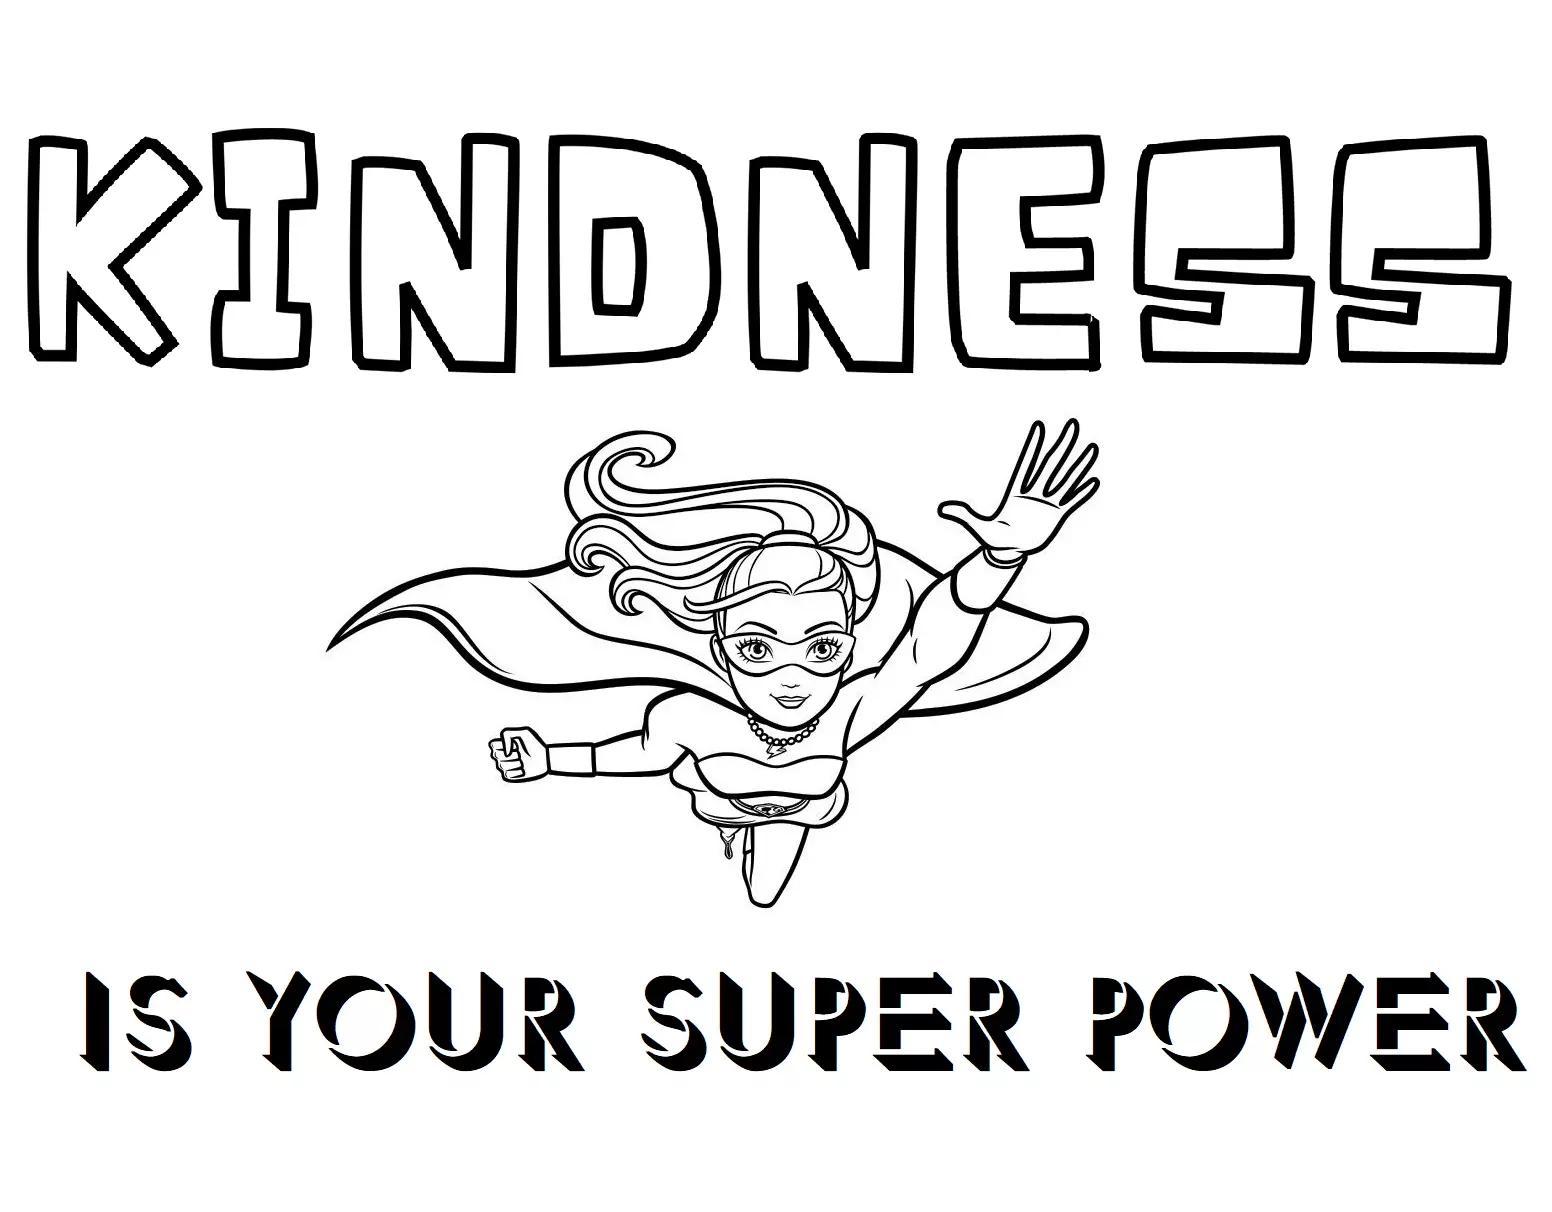 Kindness is Your Super Power